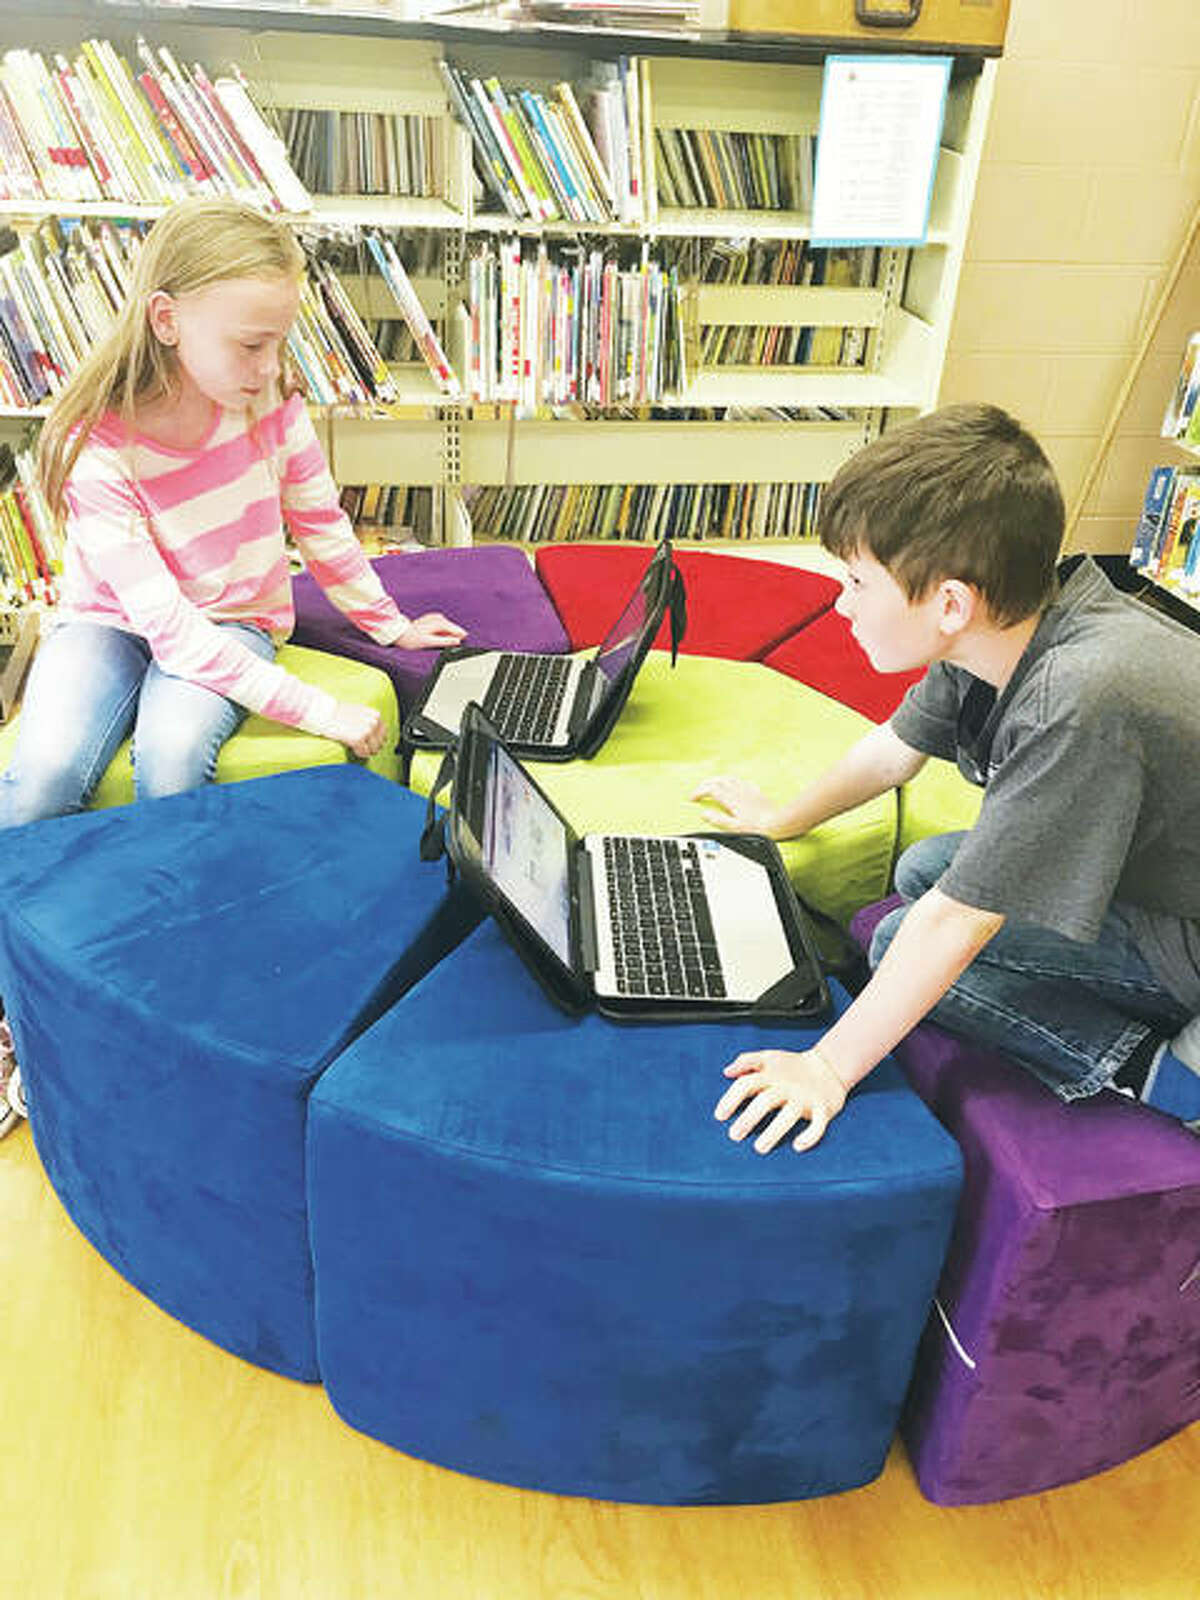 Fourth-grade students Claire Settles and Tucker Durbin work together on their Chromebooks, seated comfortably, which was a major priority when it came to students’ wants for the new library media center. Teachers visited classrooms and placed suggestion boxes for youngsters’ ideas, all of which were read, Mount Olive reading teacher Mary Griffel said.